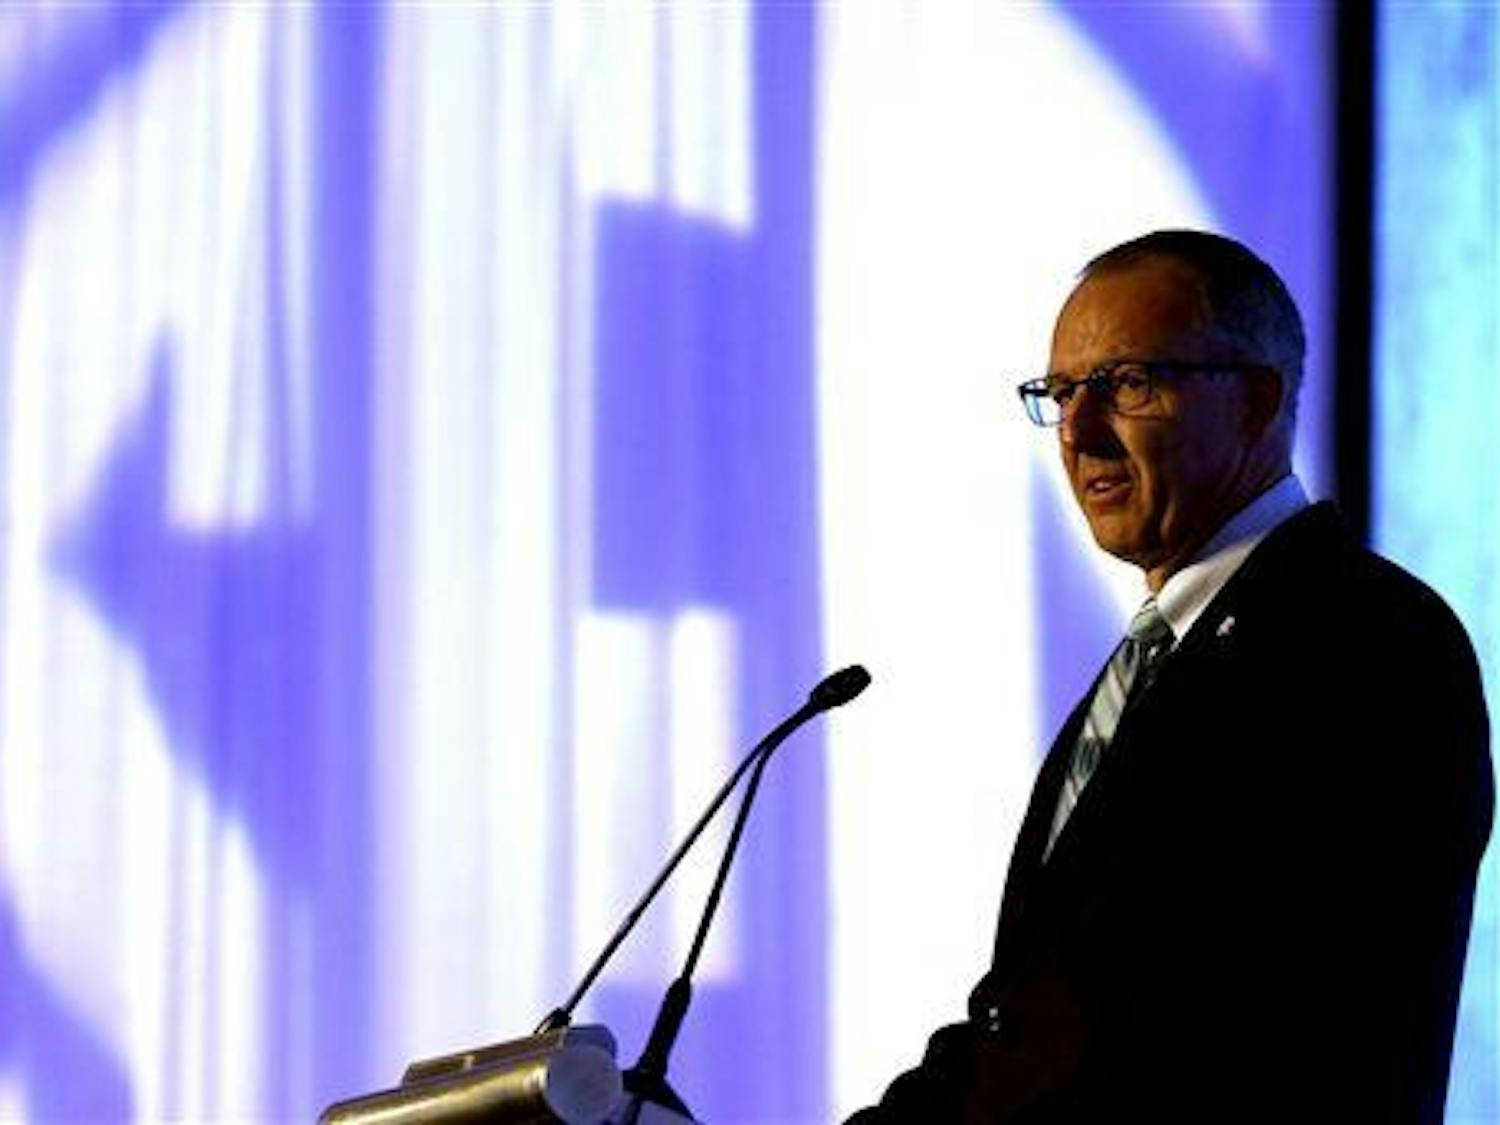 SEC Commissioner Greg Sankey speaks during the Southeastern Conference NCAA college football media days, Monday, July 13, 2015, in Hoover, Ala. (AP Photo/Butch Dill)